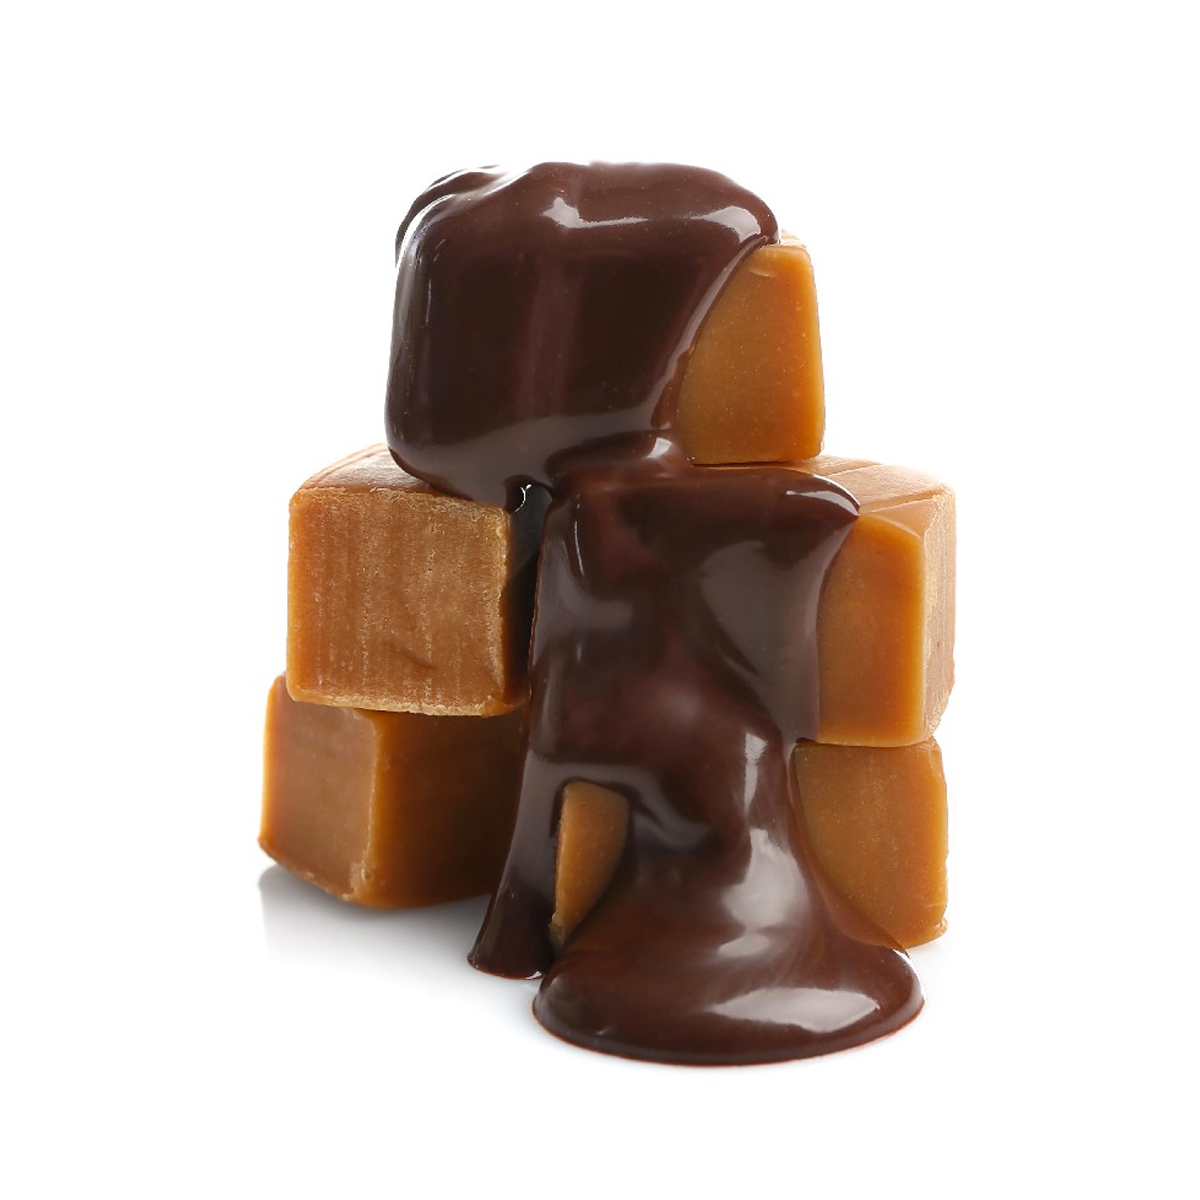 14-facts-about-national-caramel-day-april-5th